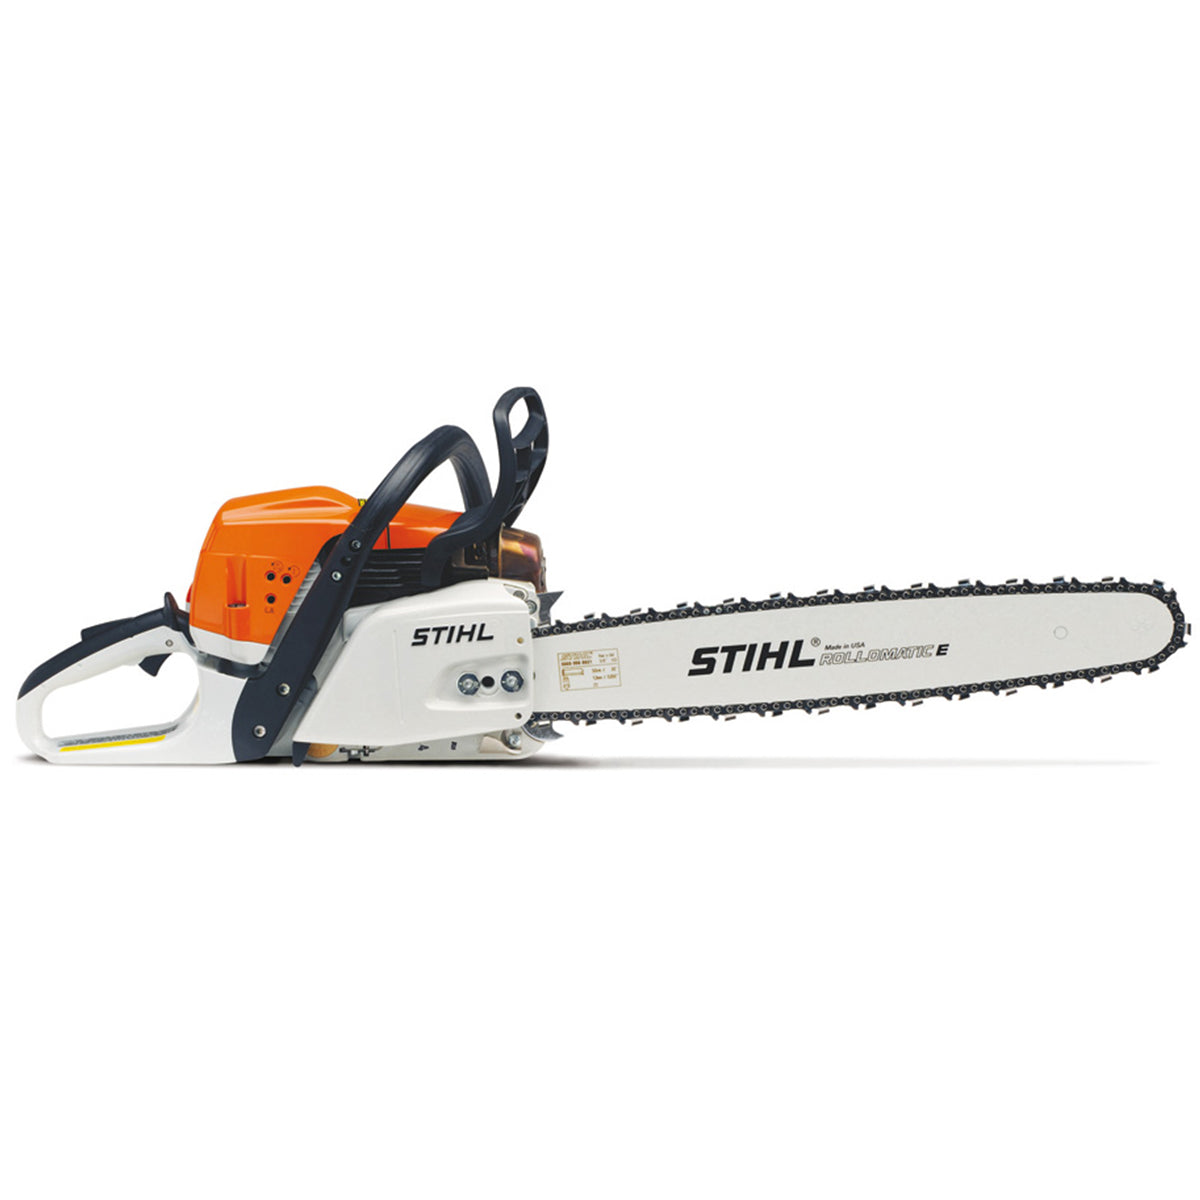 Chaine tronconneuse Stihl 3636-000-0056 coupe 40 55 maillons 020-ms201